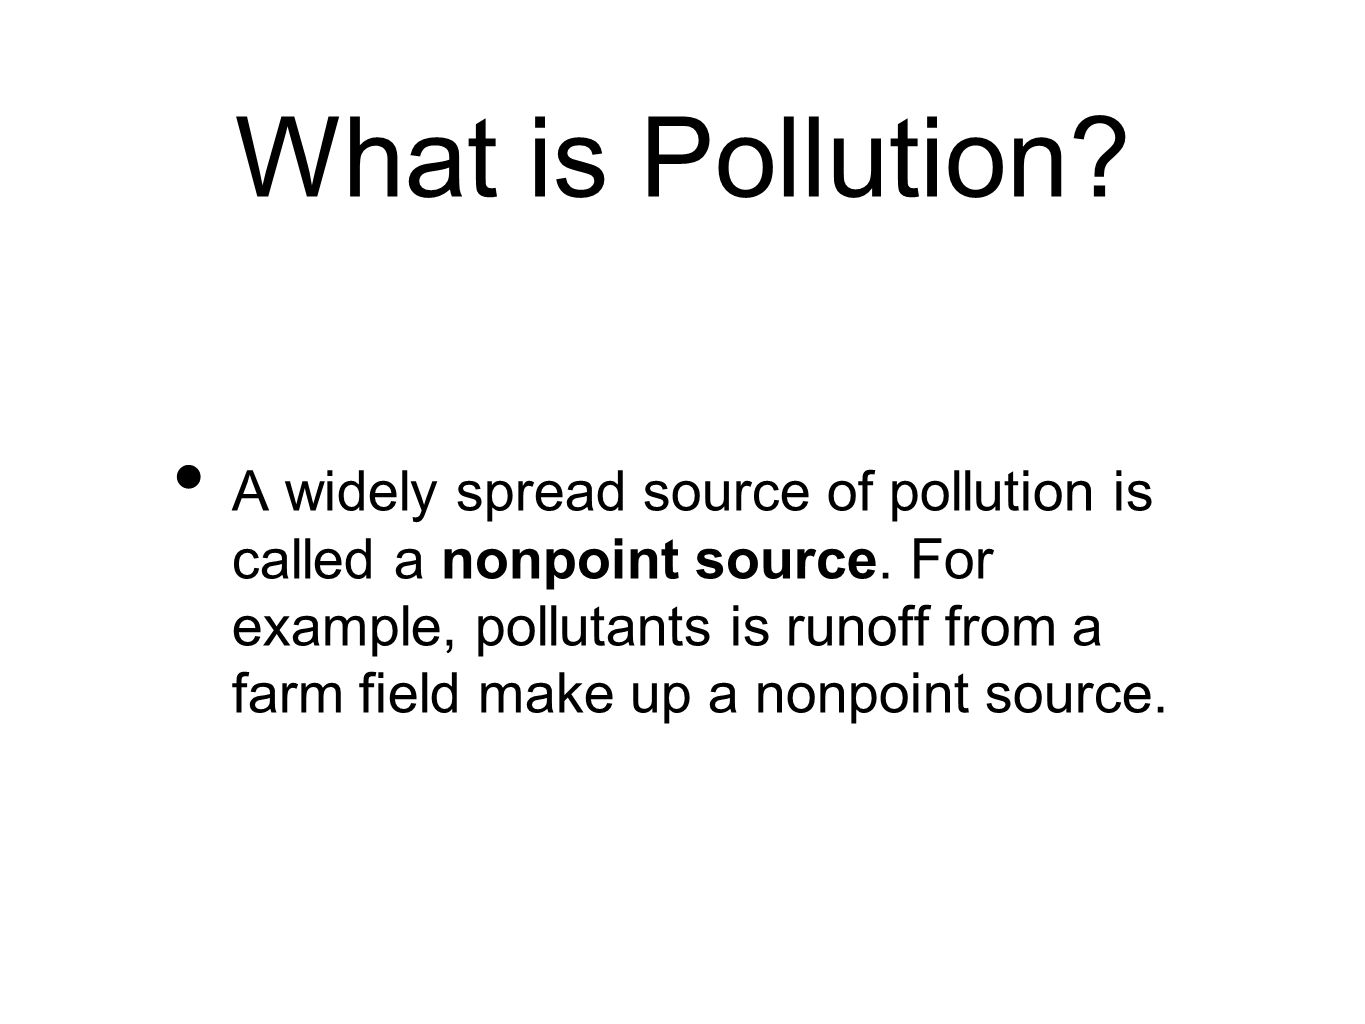 What is Pollution. A widely spread source of pollution is called a nonpoint source.